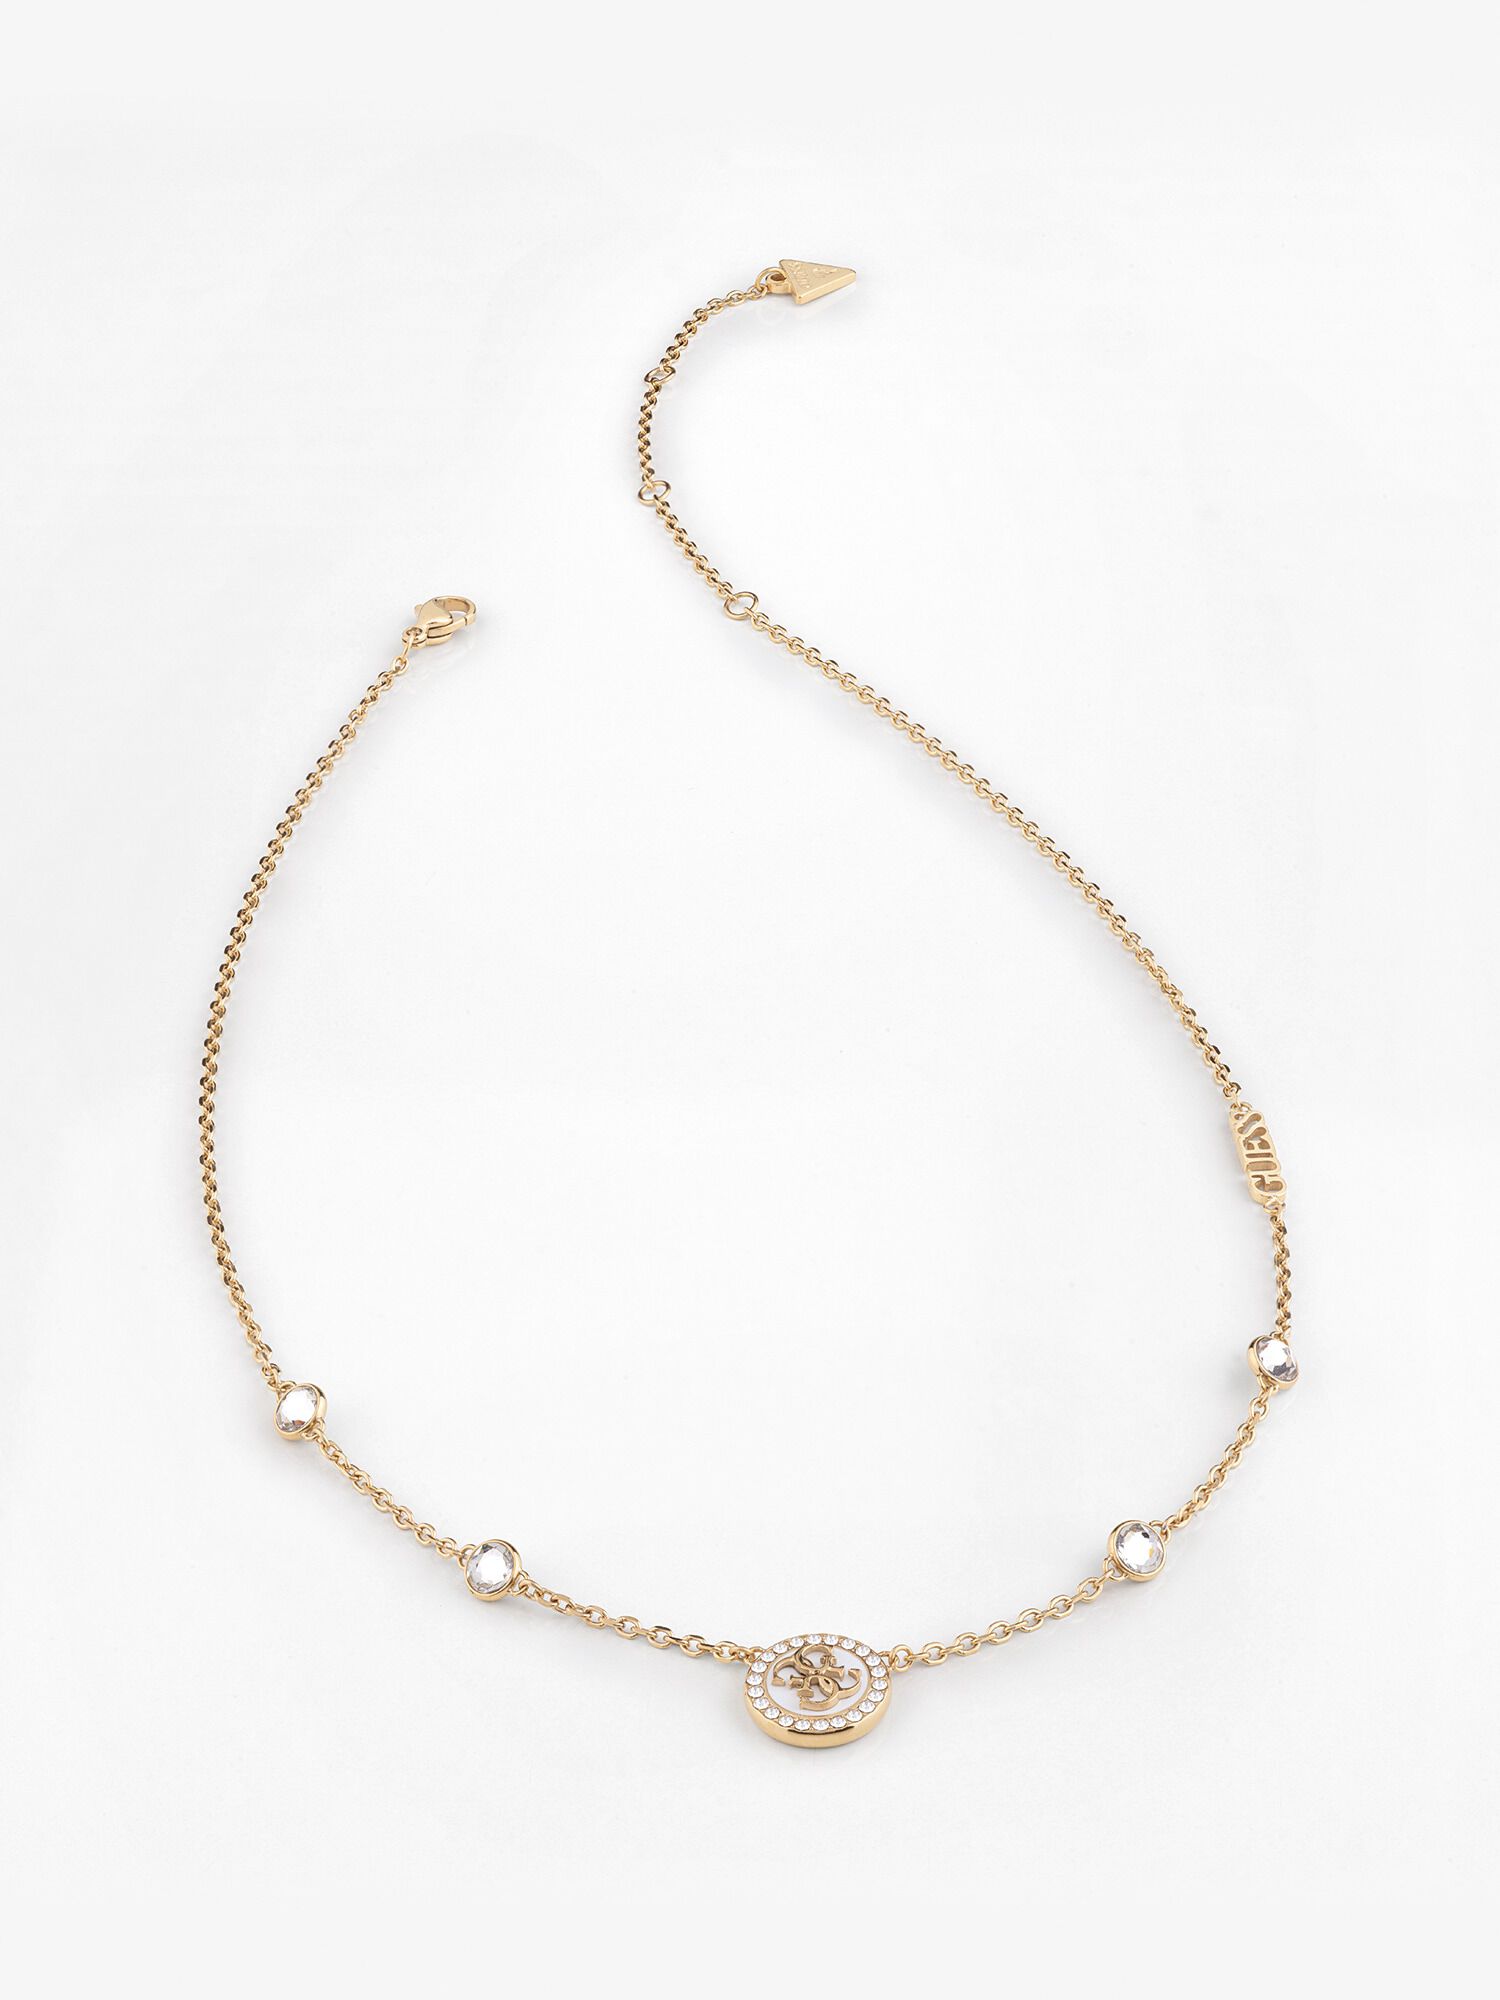 Guess Womens Necklace Online Sale - Guess SG Store